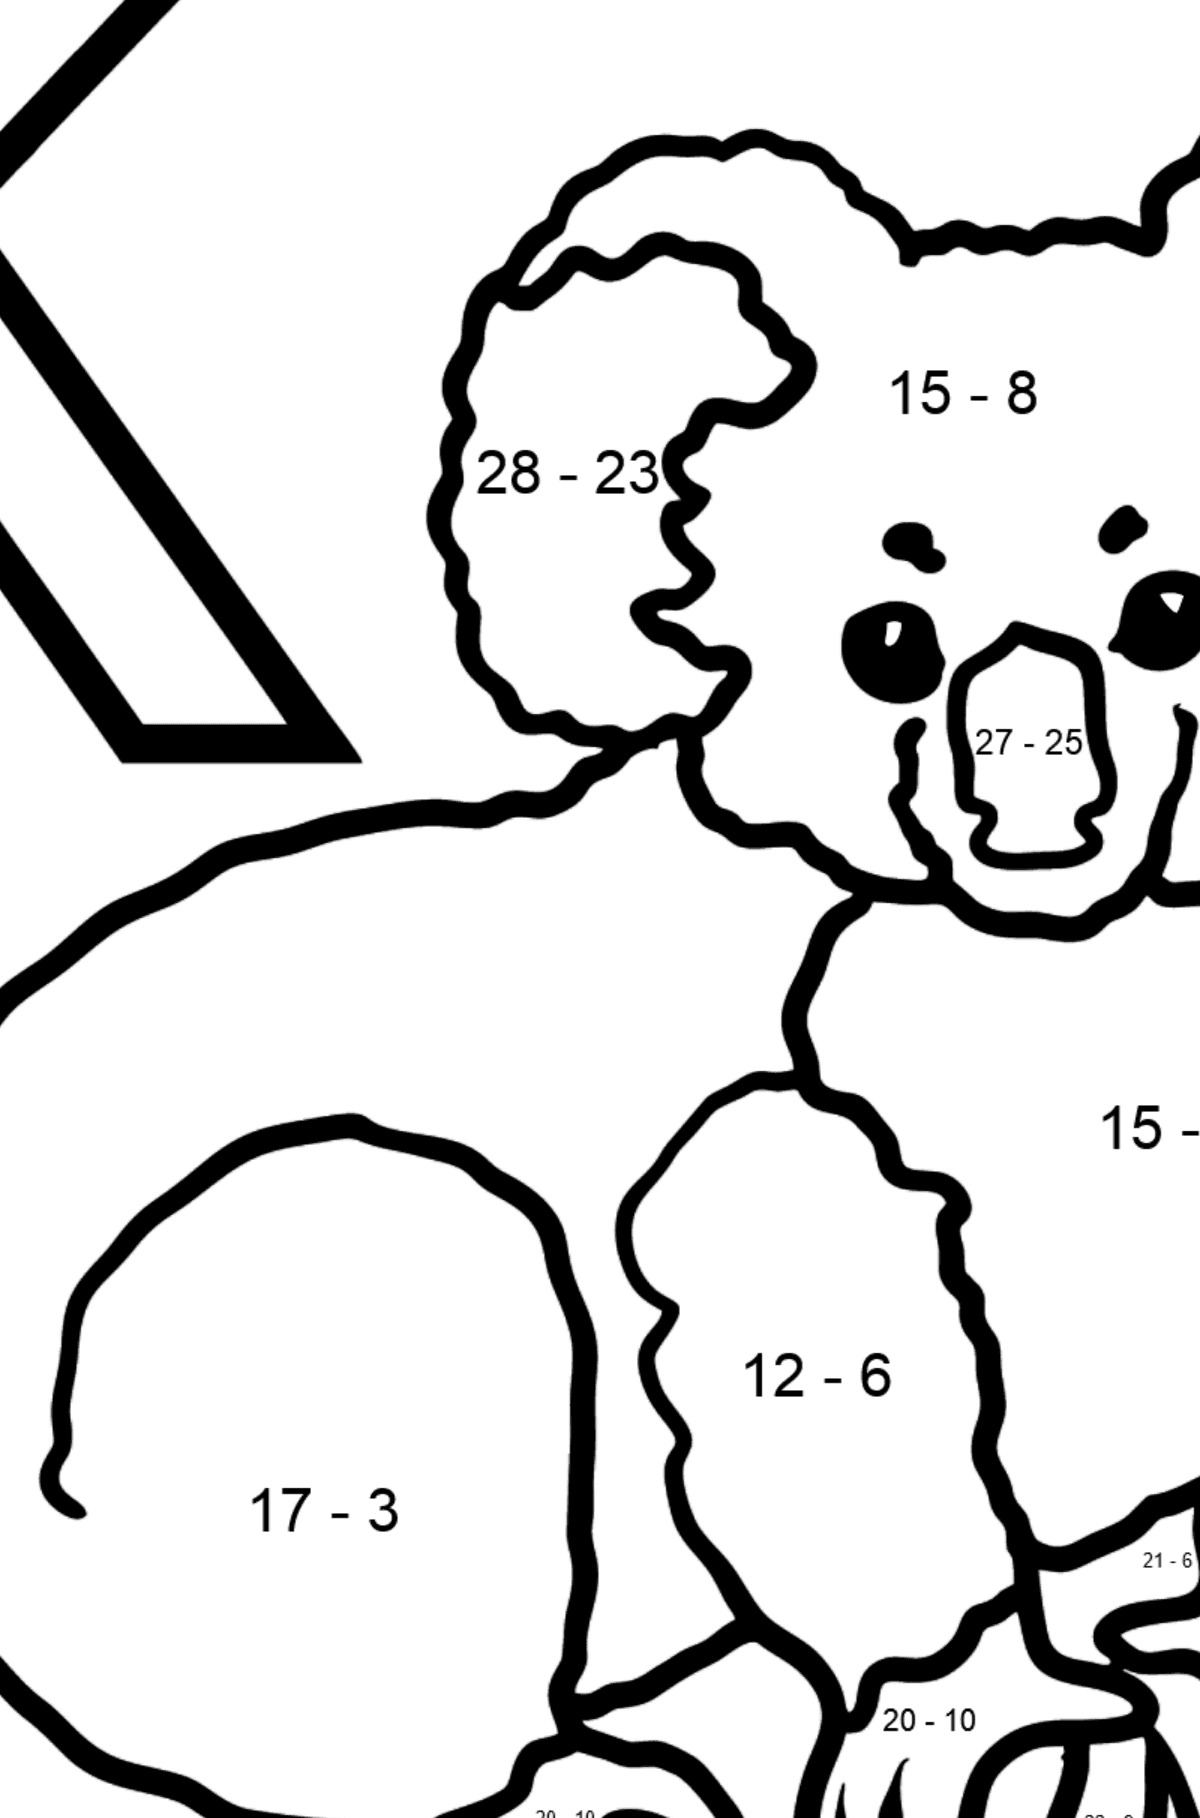 Spanish Letter K coloring pages - KOALA - Math Coloring - Subtraction for Kids